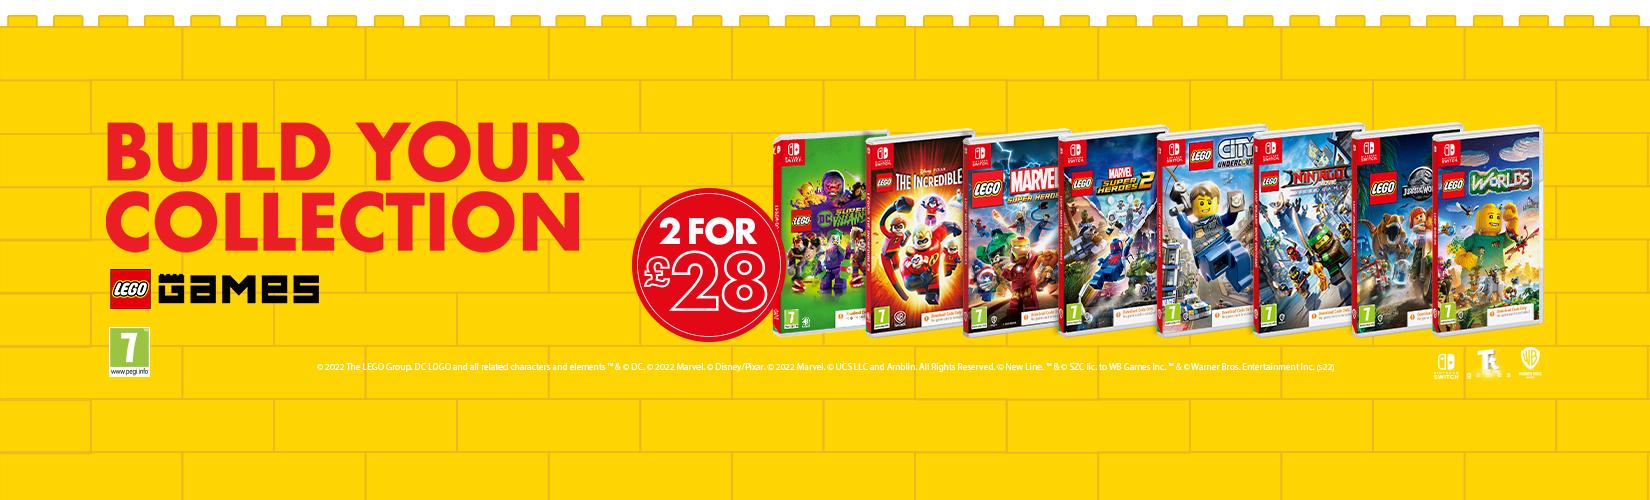 Build your collection. Lego games. 2 for £28.